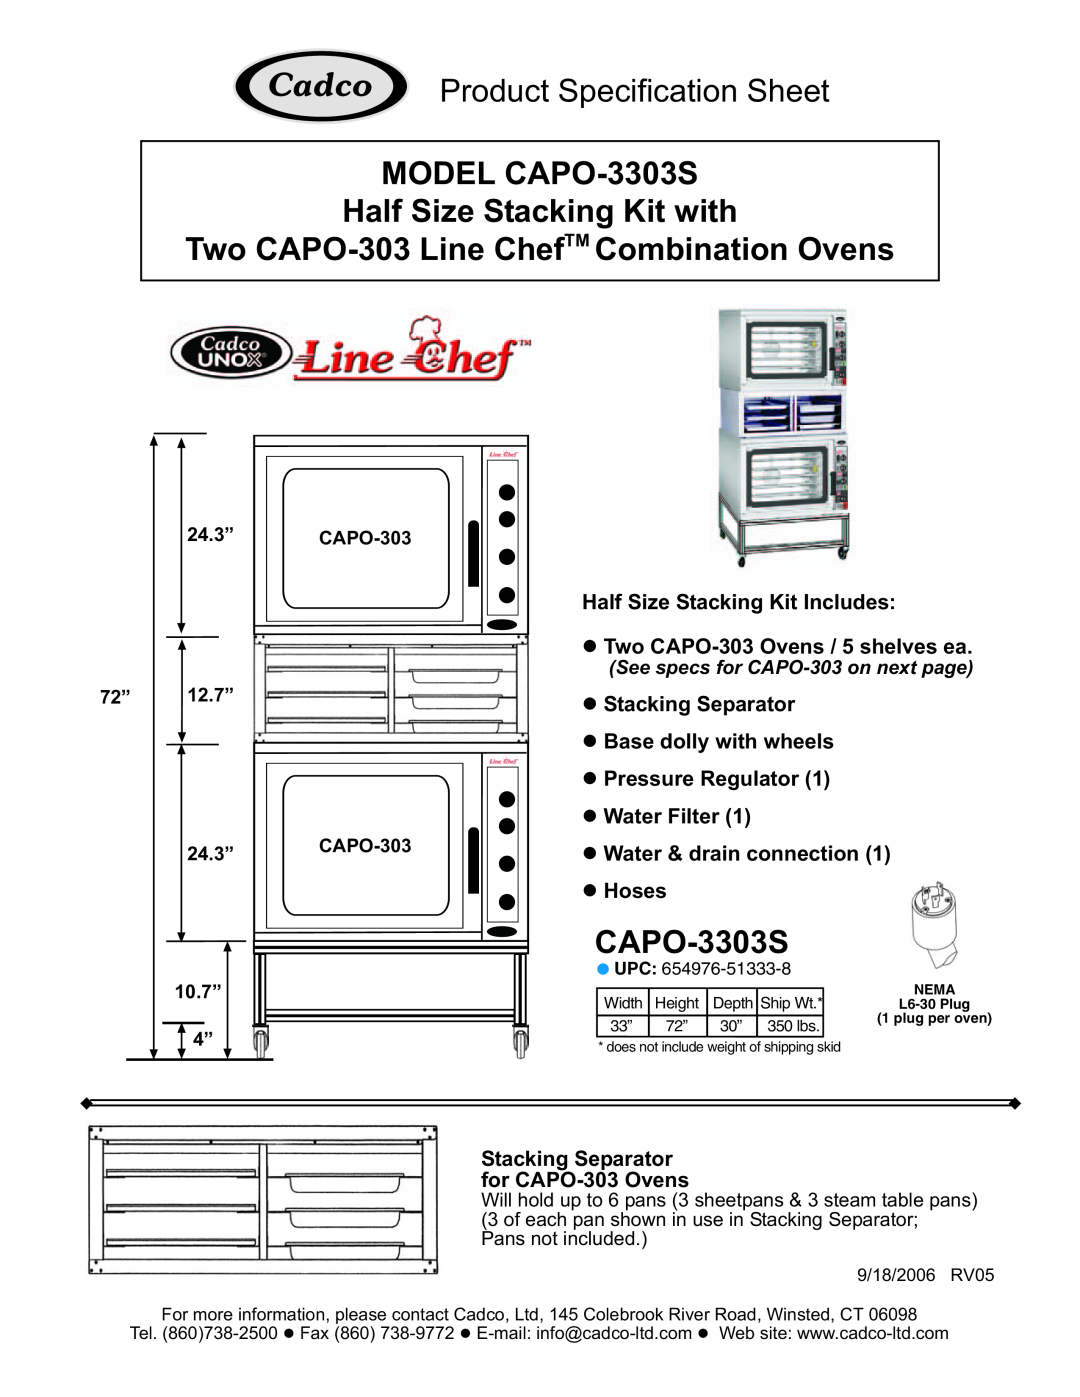 Cadco CAPO-3303S specifications Half Size Stacking Kit Includes, l Two CAPO-303Ovens / 5 shelves ea, l Stacking Separator 